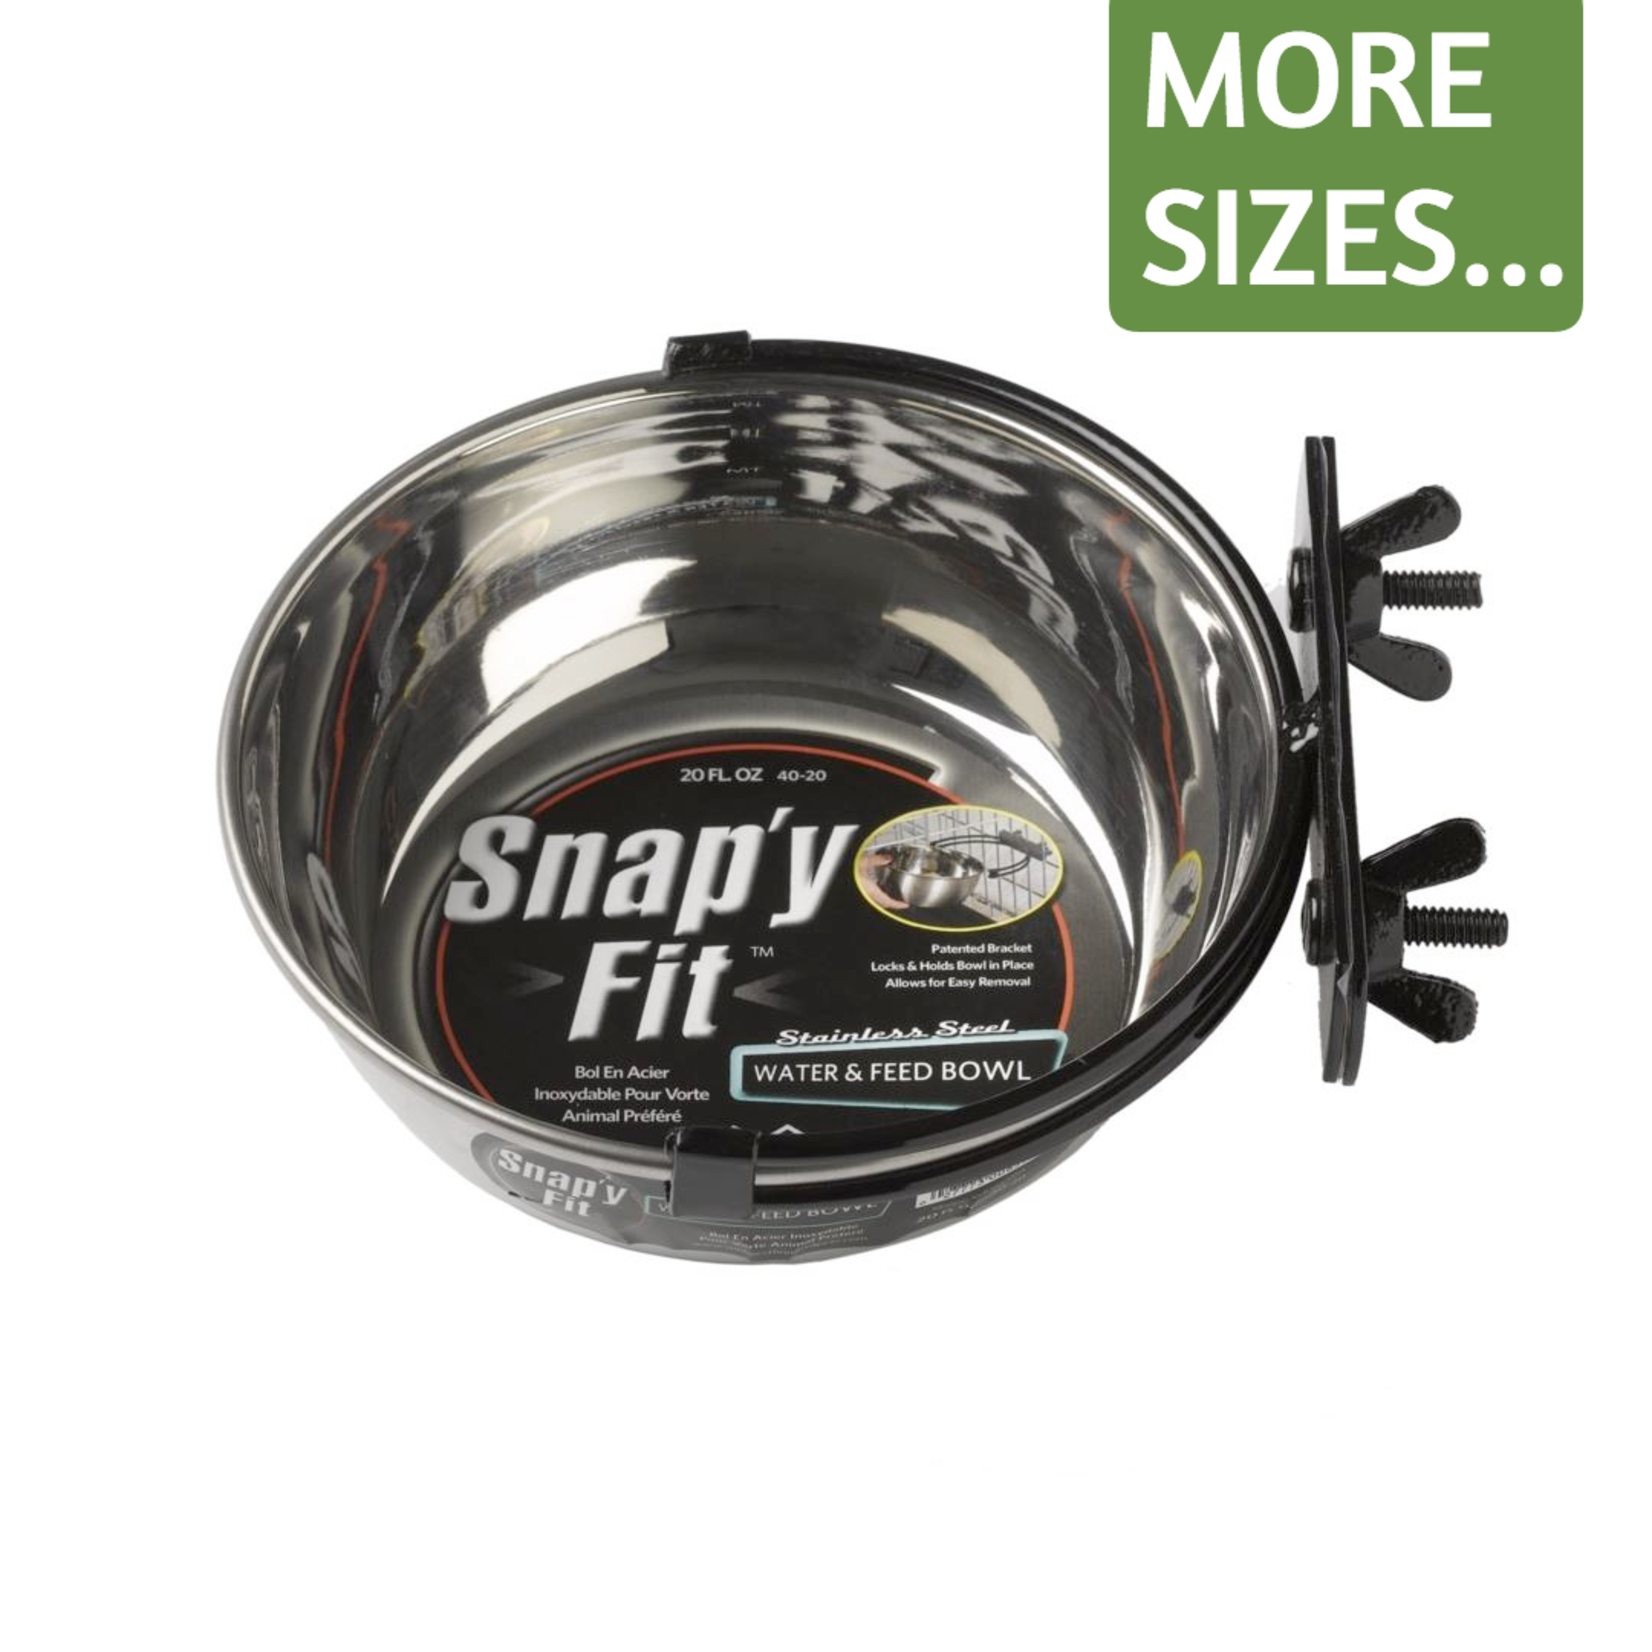 Midwest Homes for Pets Snap’y Fit Stainless Steel Crate Bowls Various Sizes